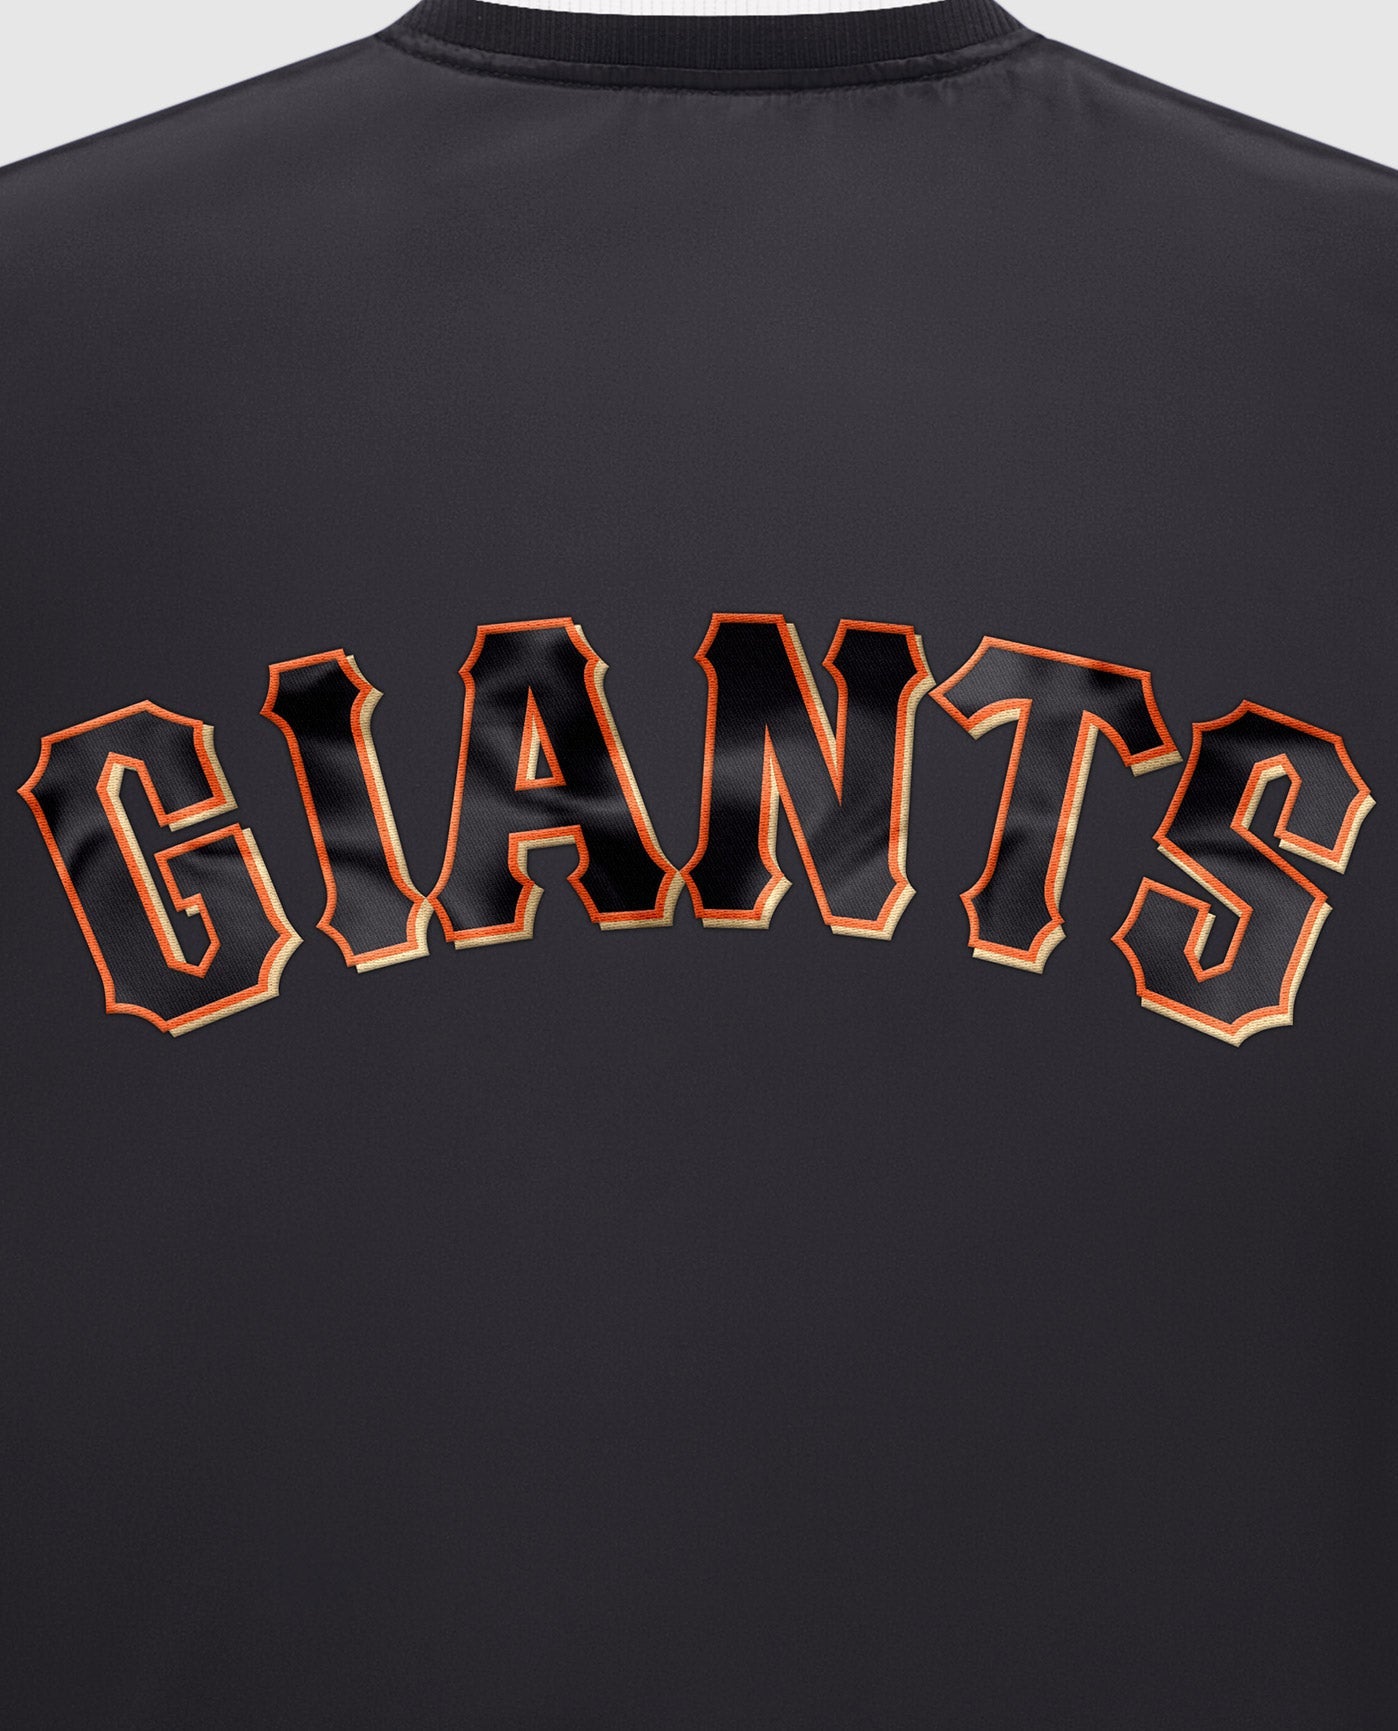 SF Giants All Star Game Jacket